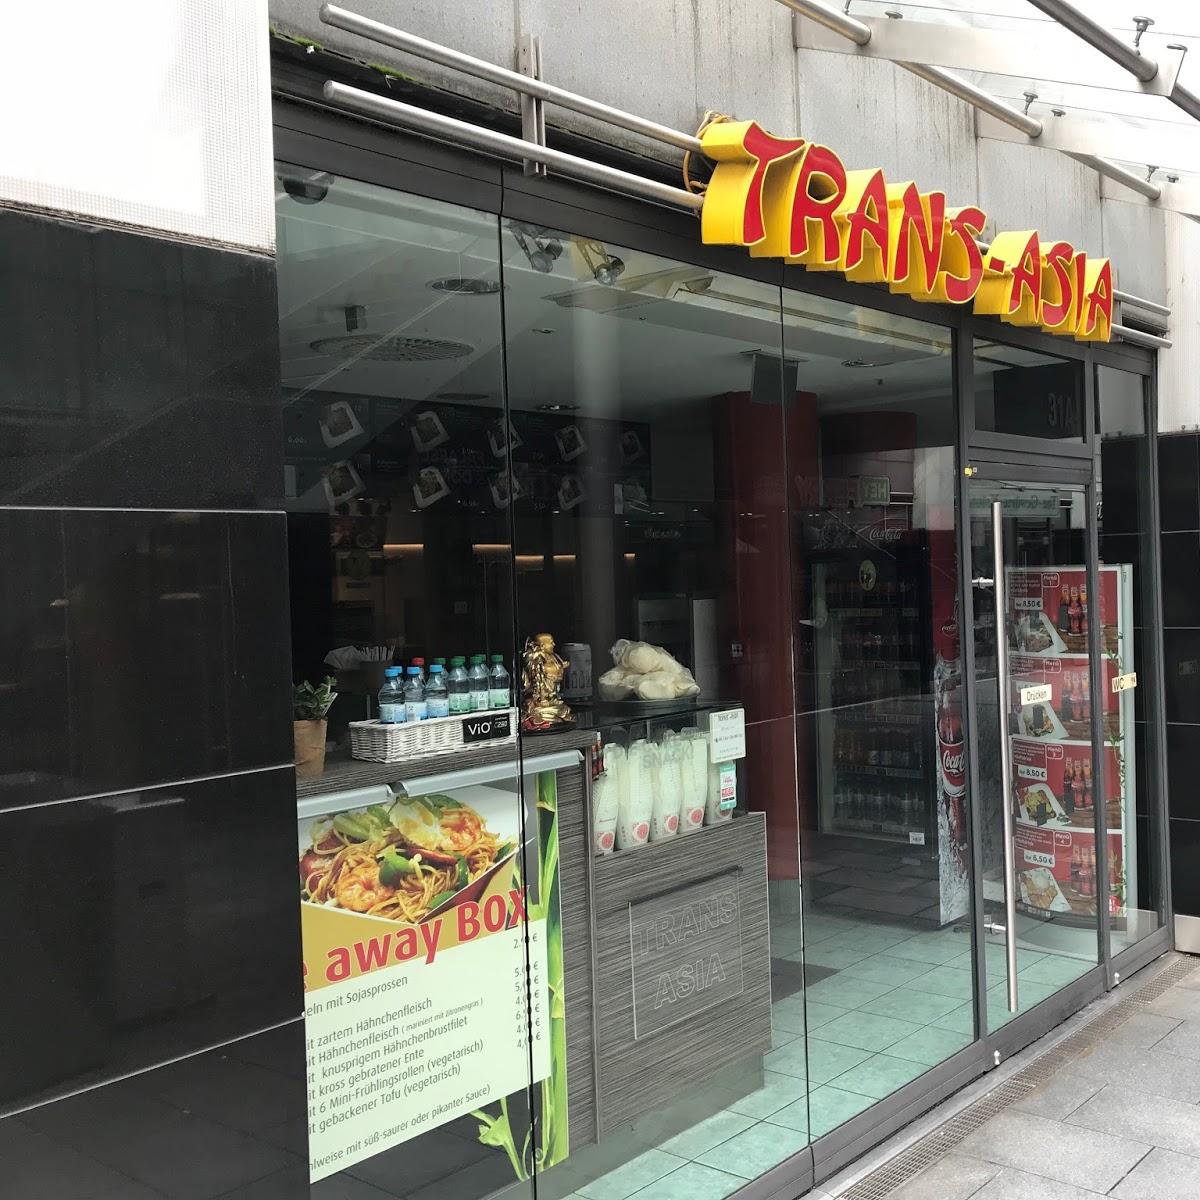 Restaurant "Trans-Asia" in Hannover